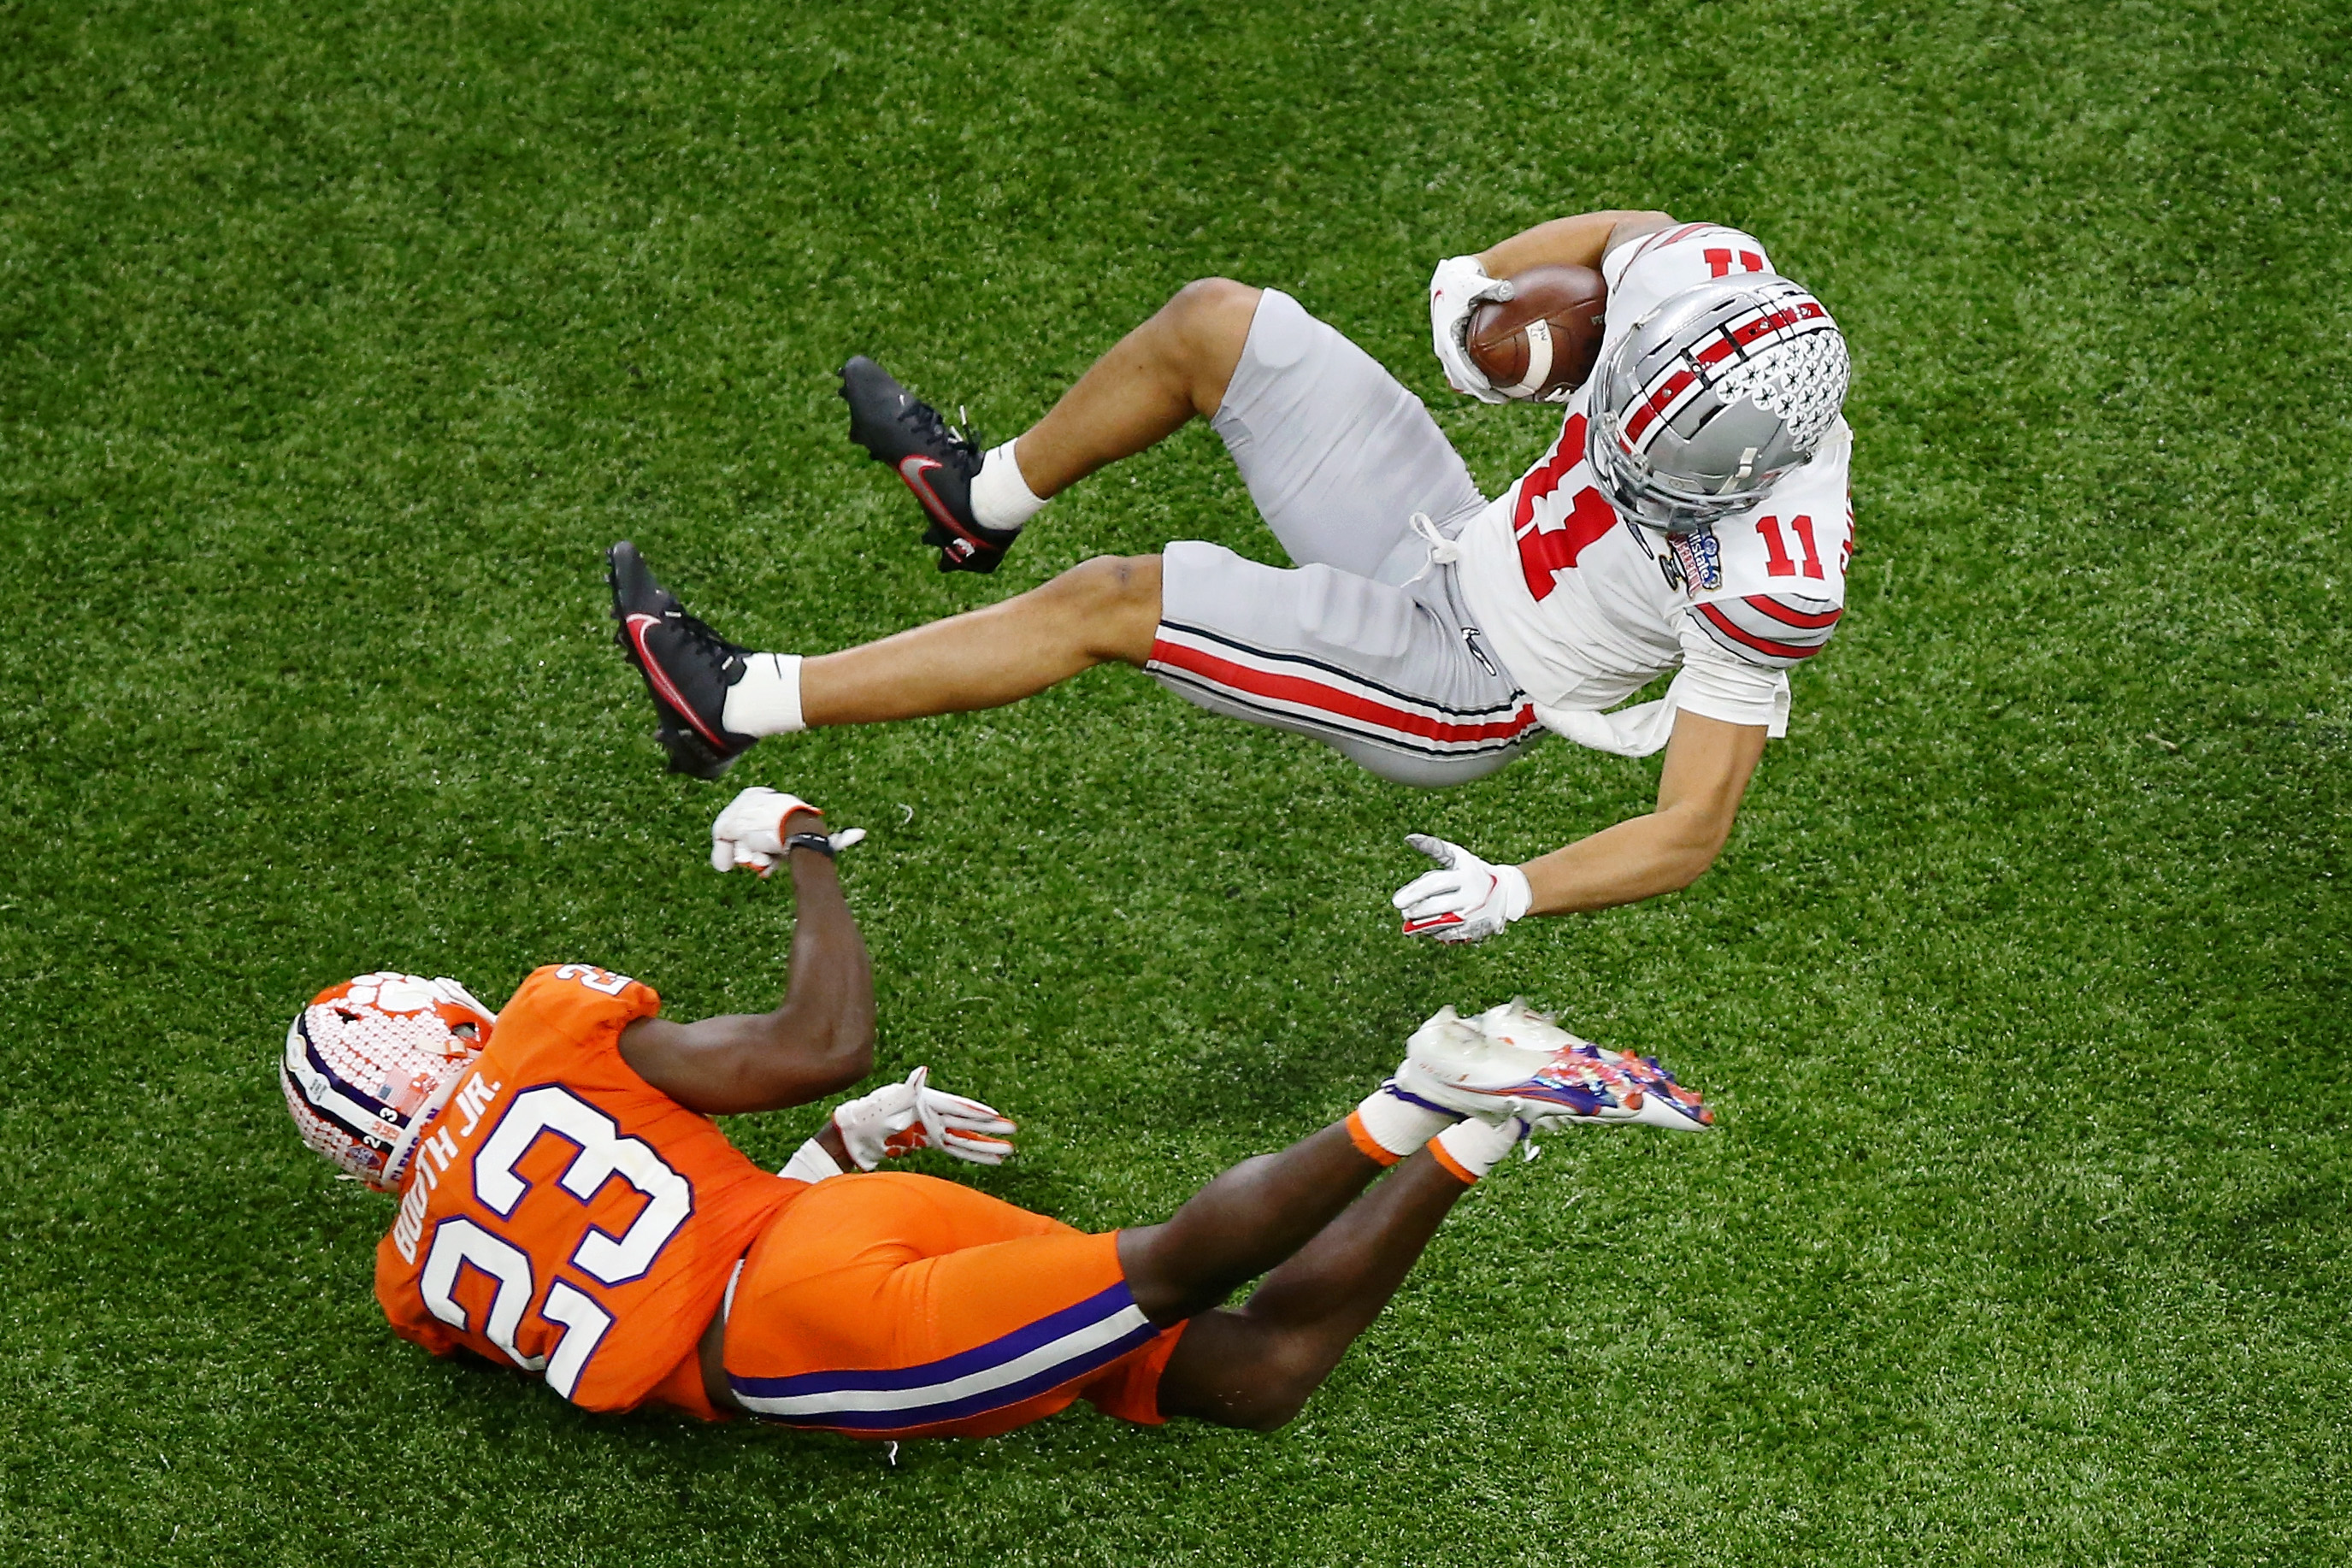 Jan 1, 2021; New Orleans, LA, USA; Clemson Tigers cornerback Andrew Booth Jr. (23) upends Ohio State Buckeyes wide receiver Jaxon Smith-Njigba (11) during the third quarter at Mercedes-Benz Superdome.